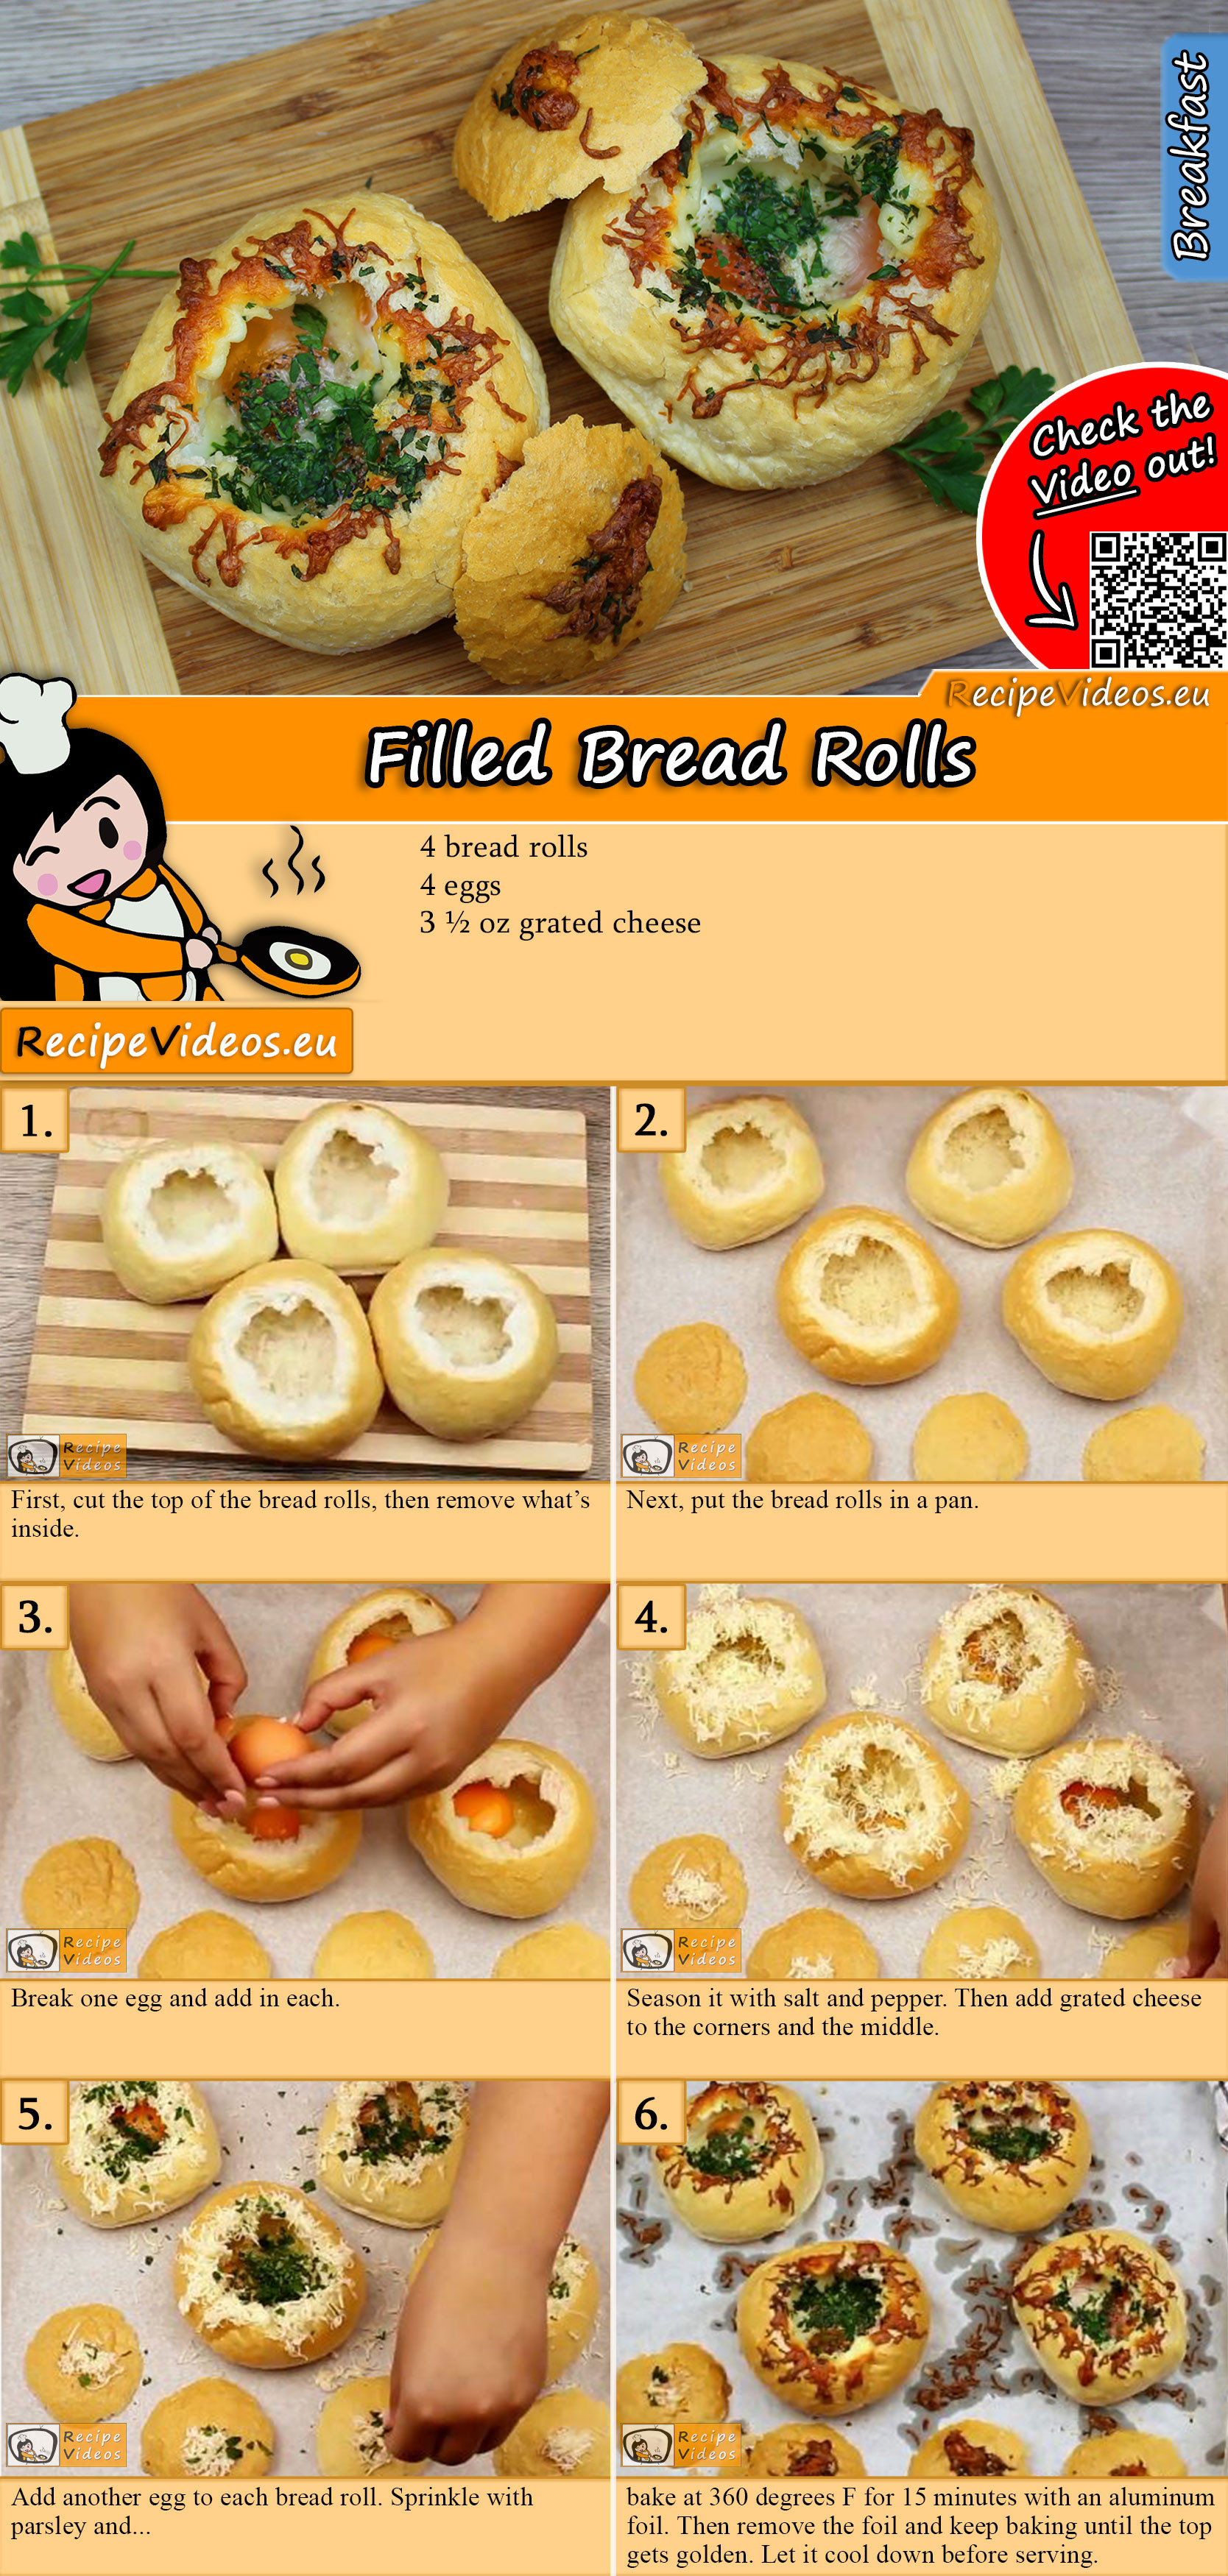 Filled Bread Rolls recipe with video